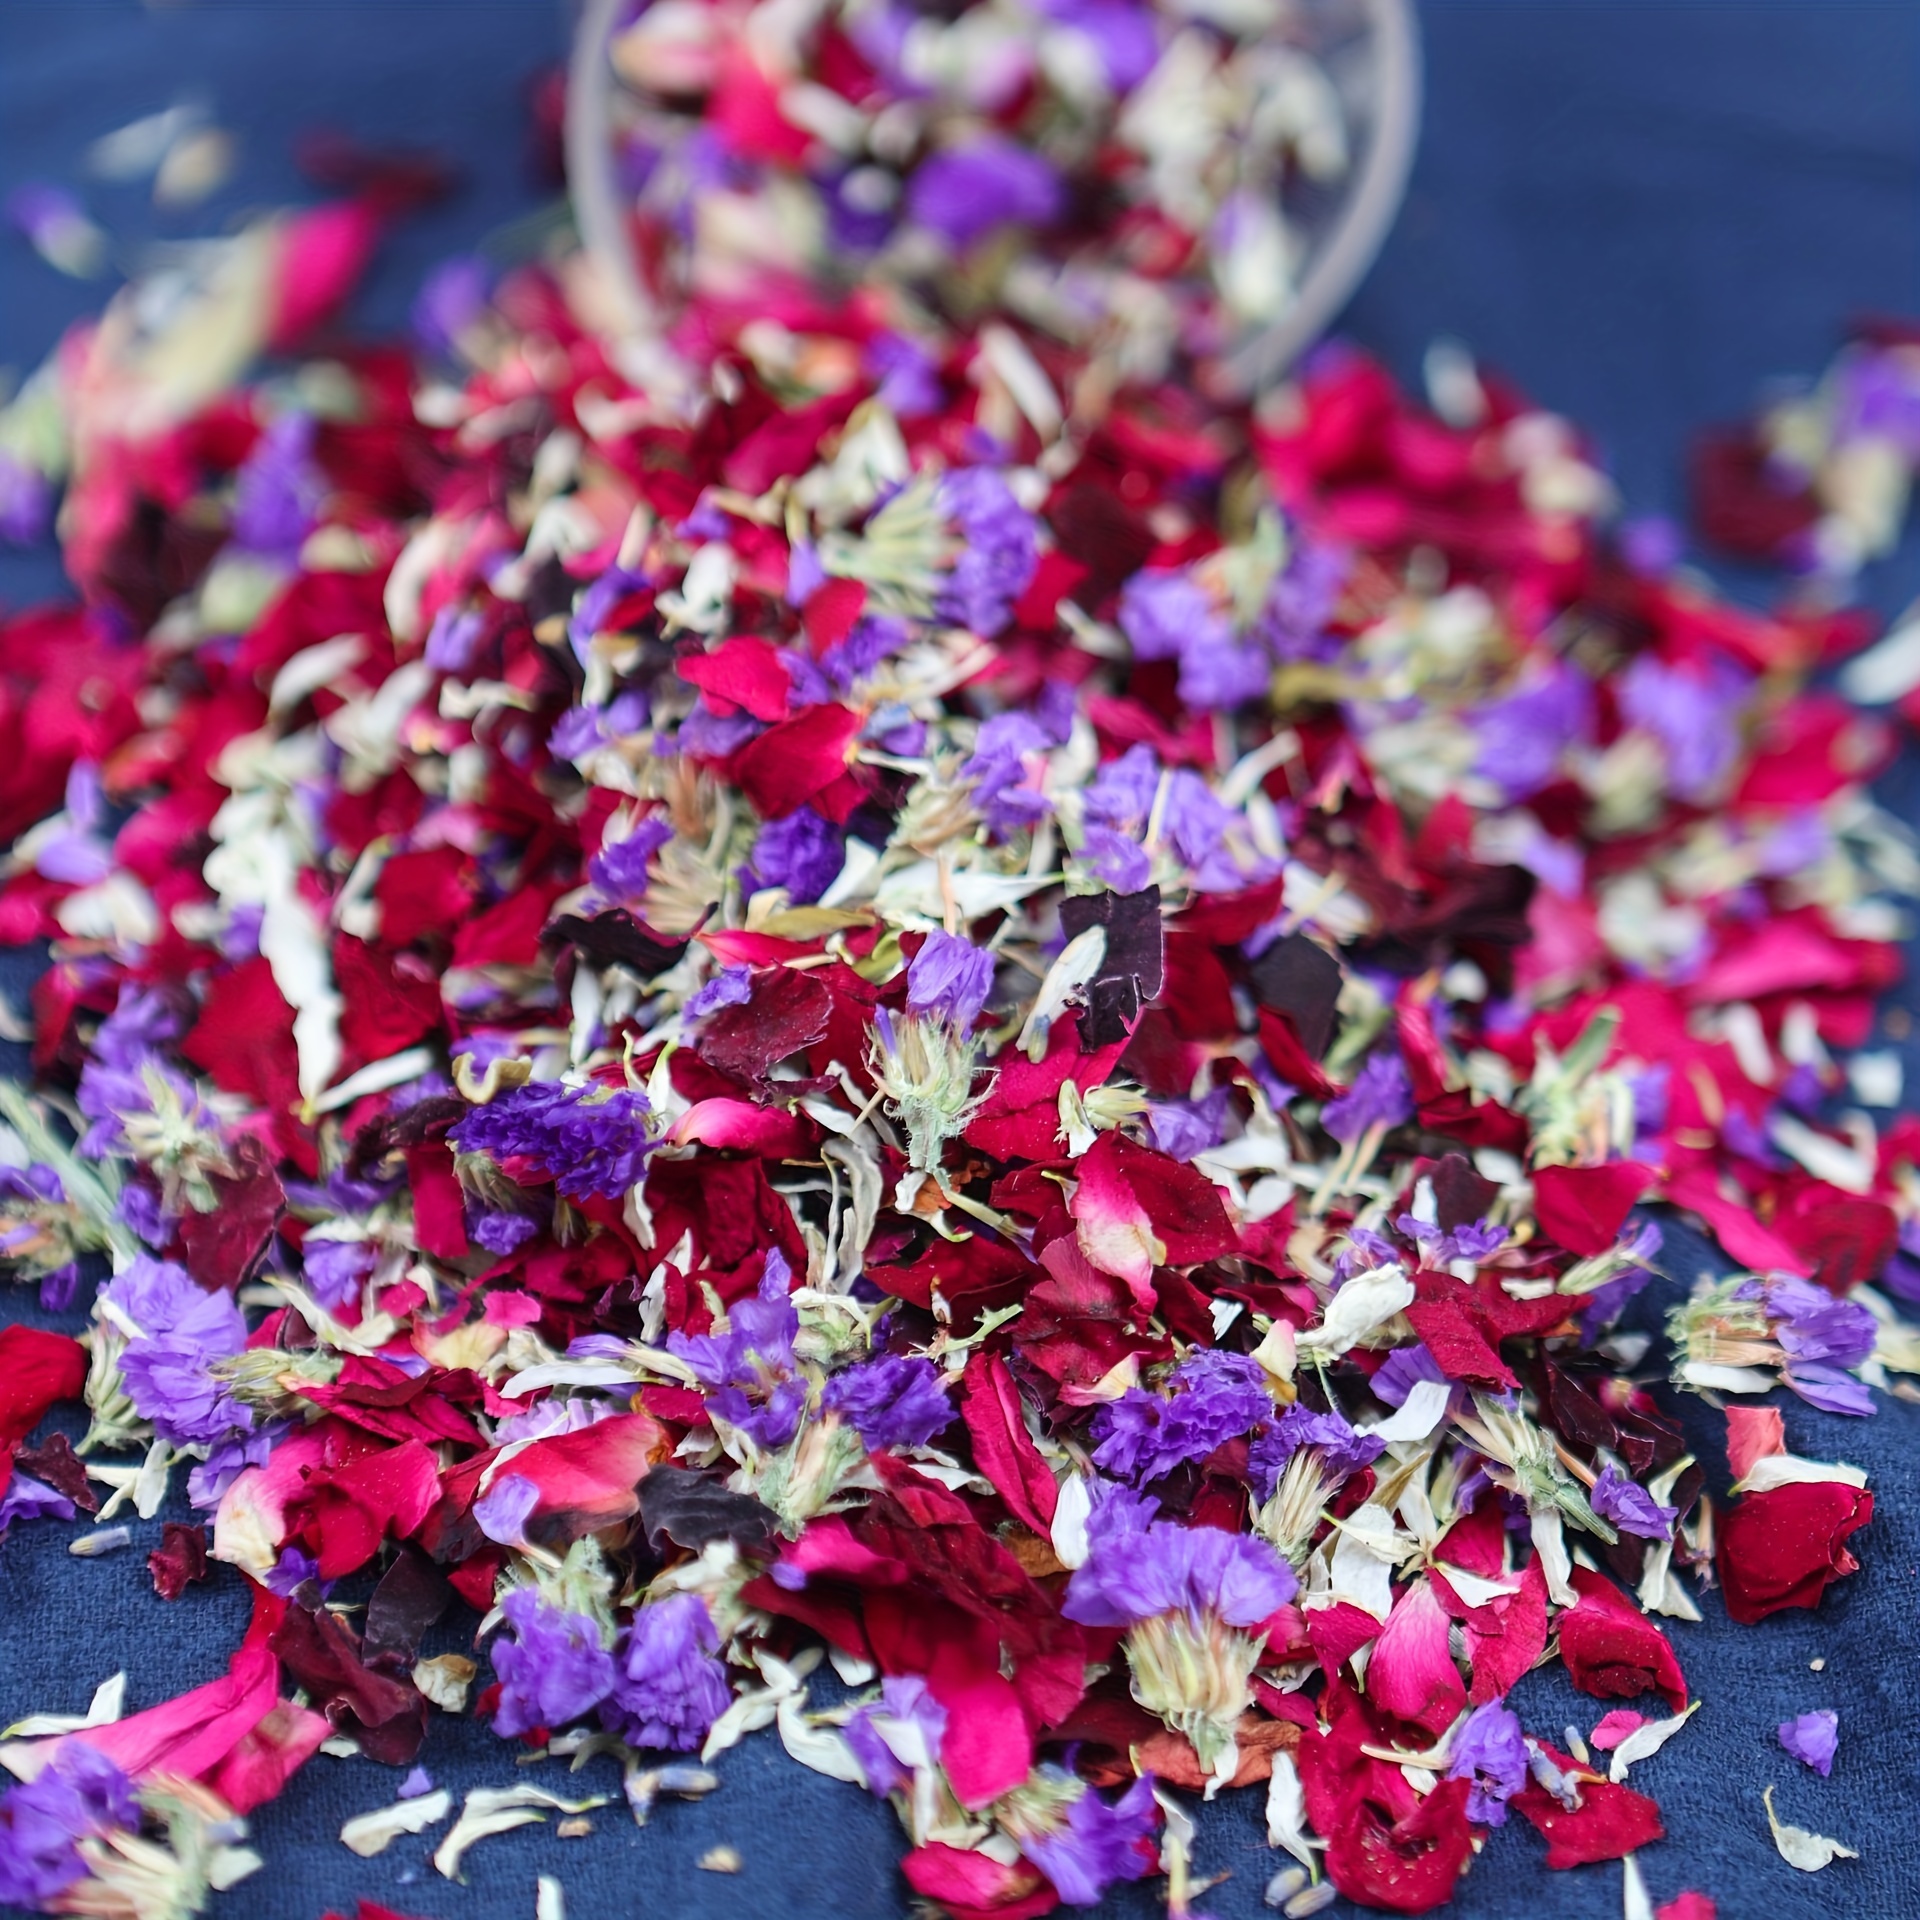 Dried Flower Confetti - Natural Dry Rose Petals Floral Wedding